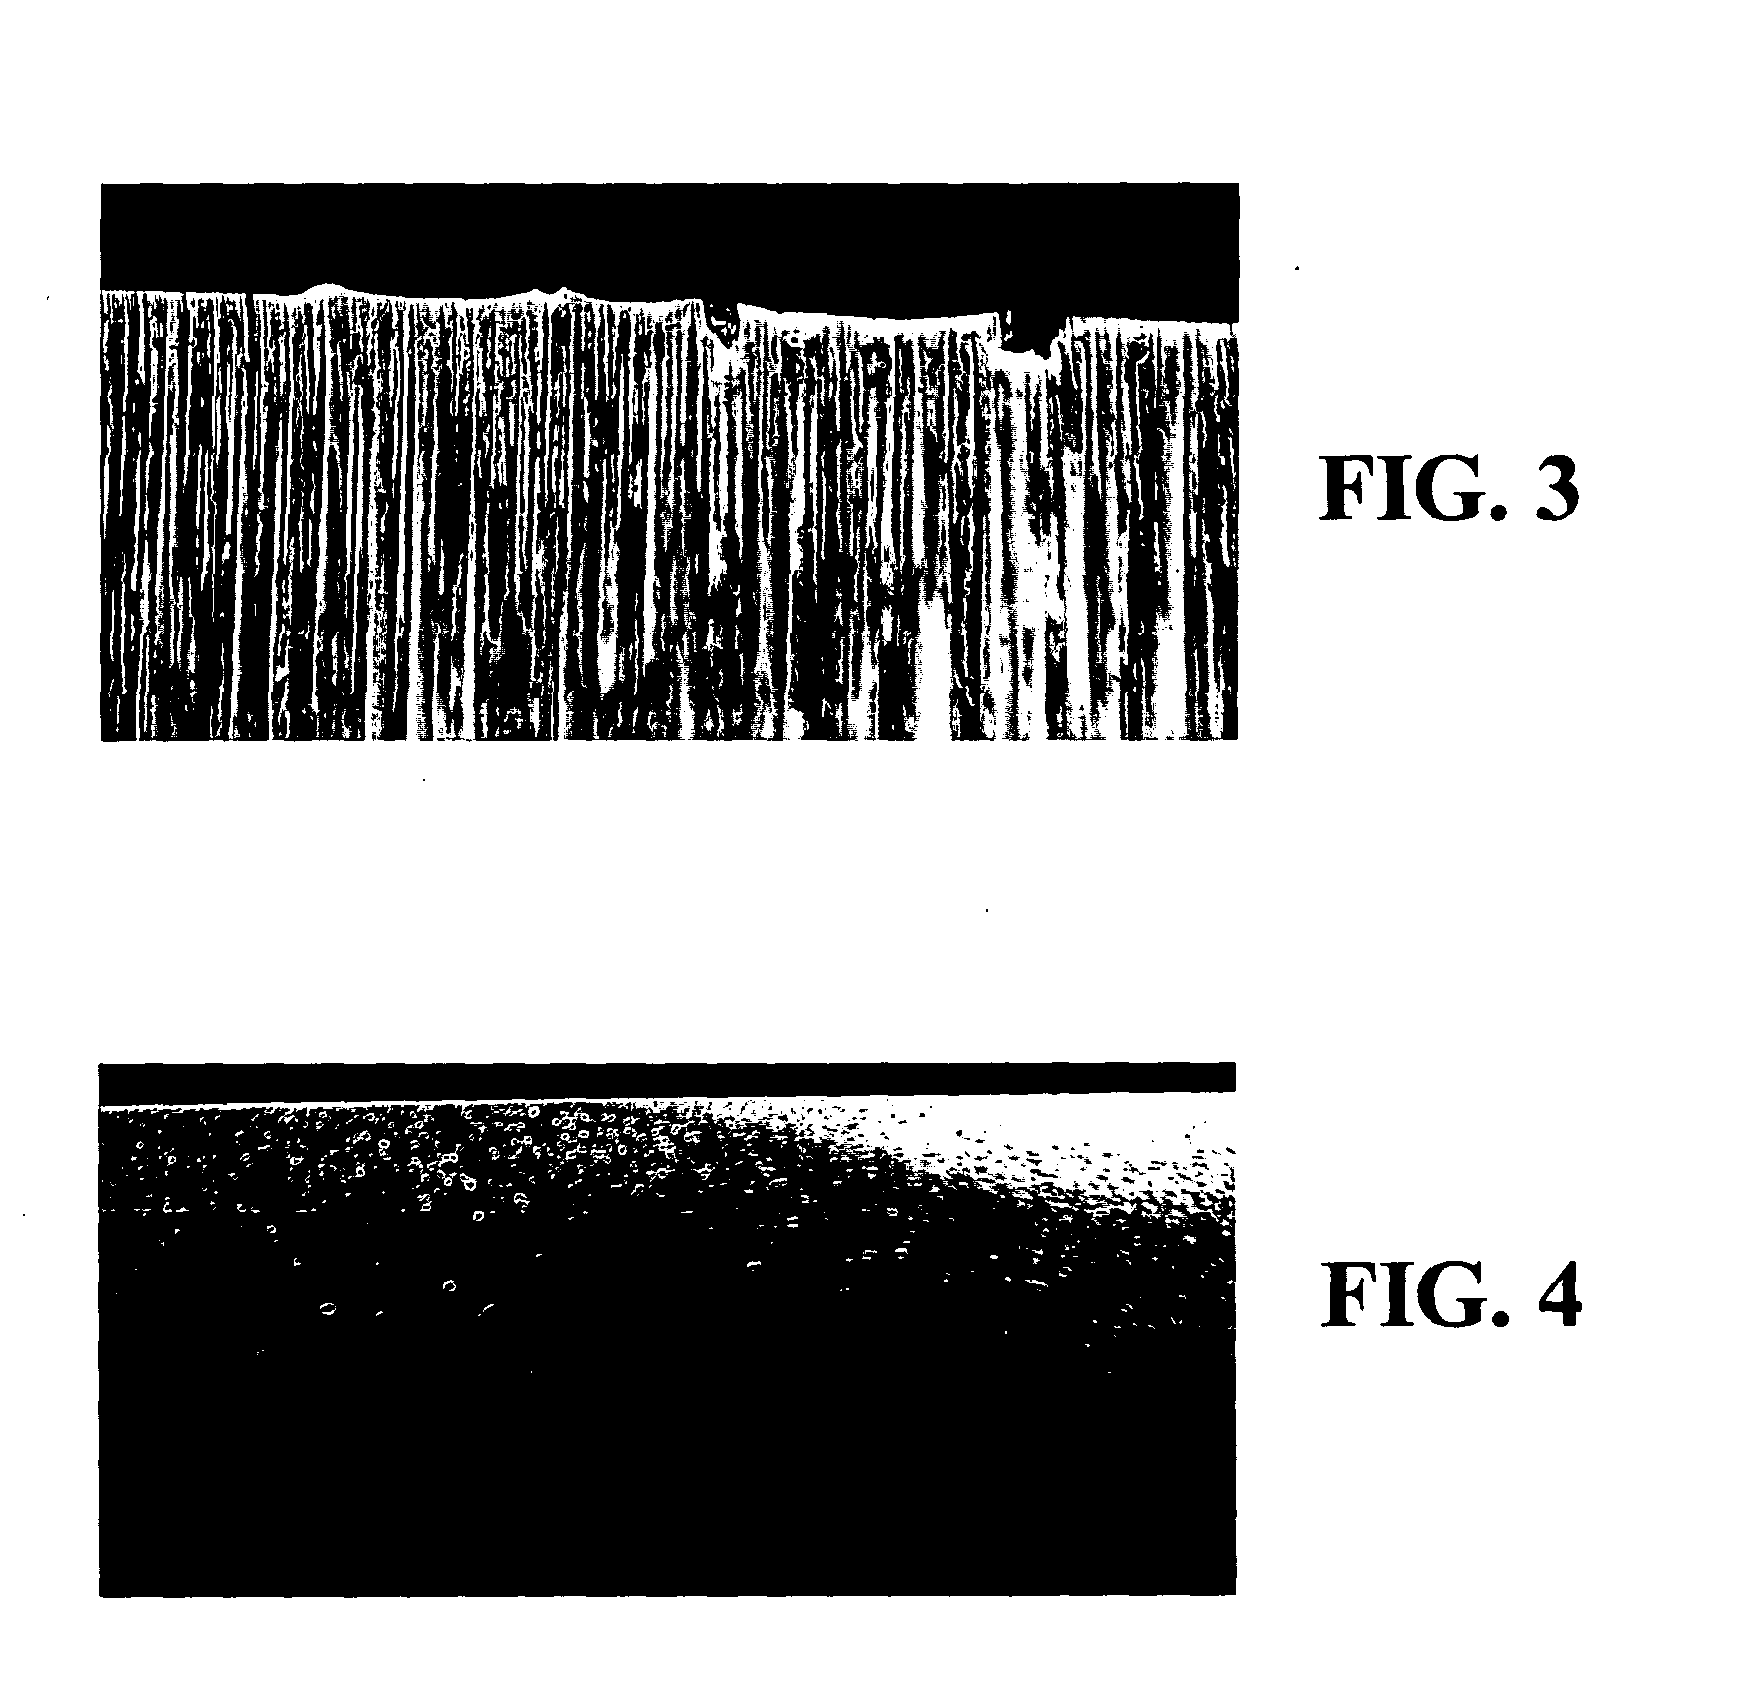 Methods for ameliorating tissue trauma from surgical incisions